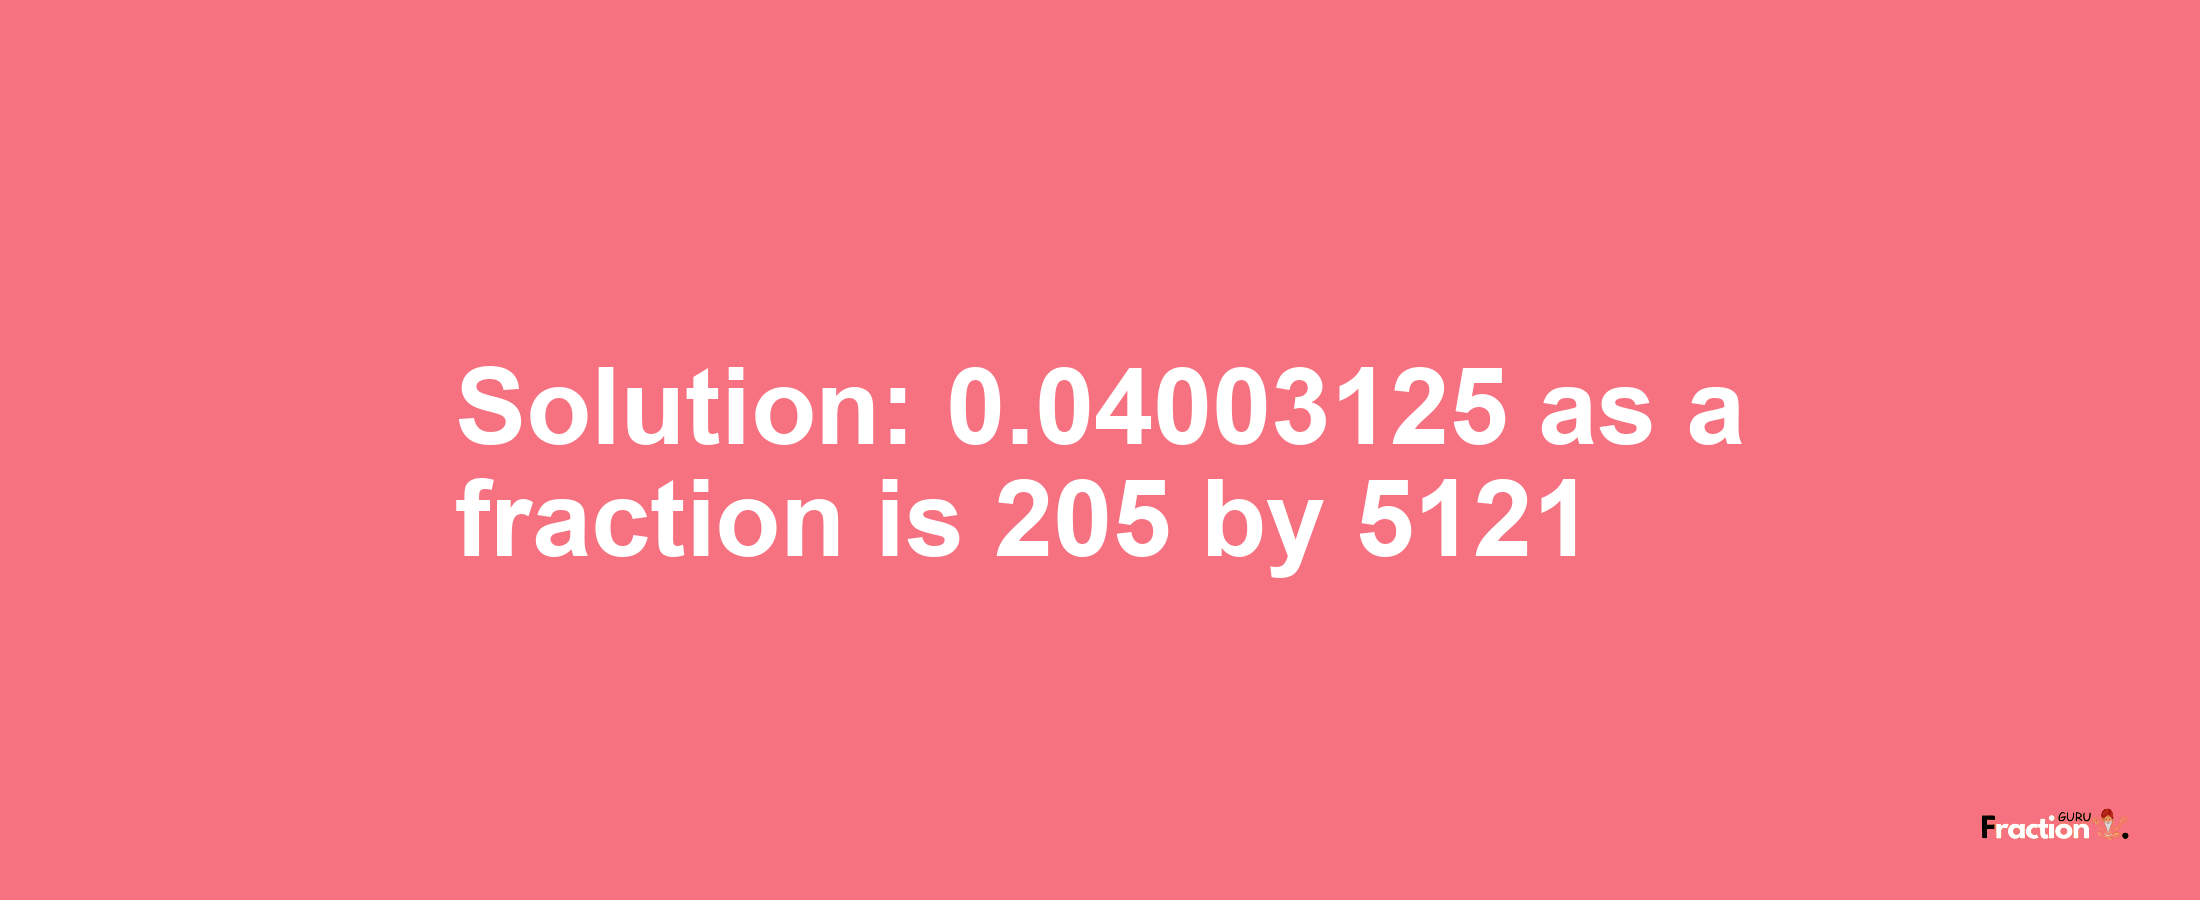 Solution:0.04003125 as a fraction is 205/5121